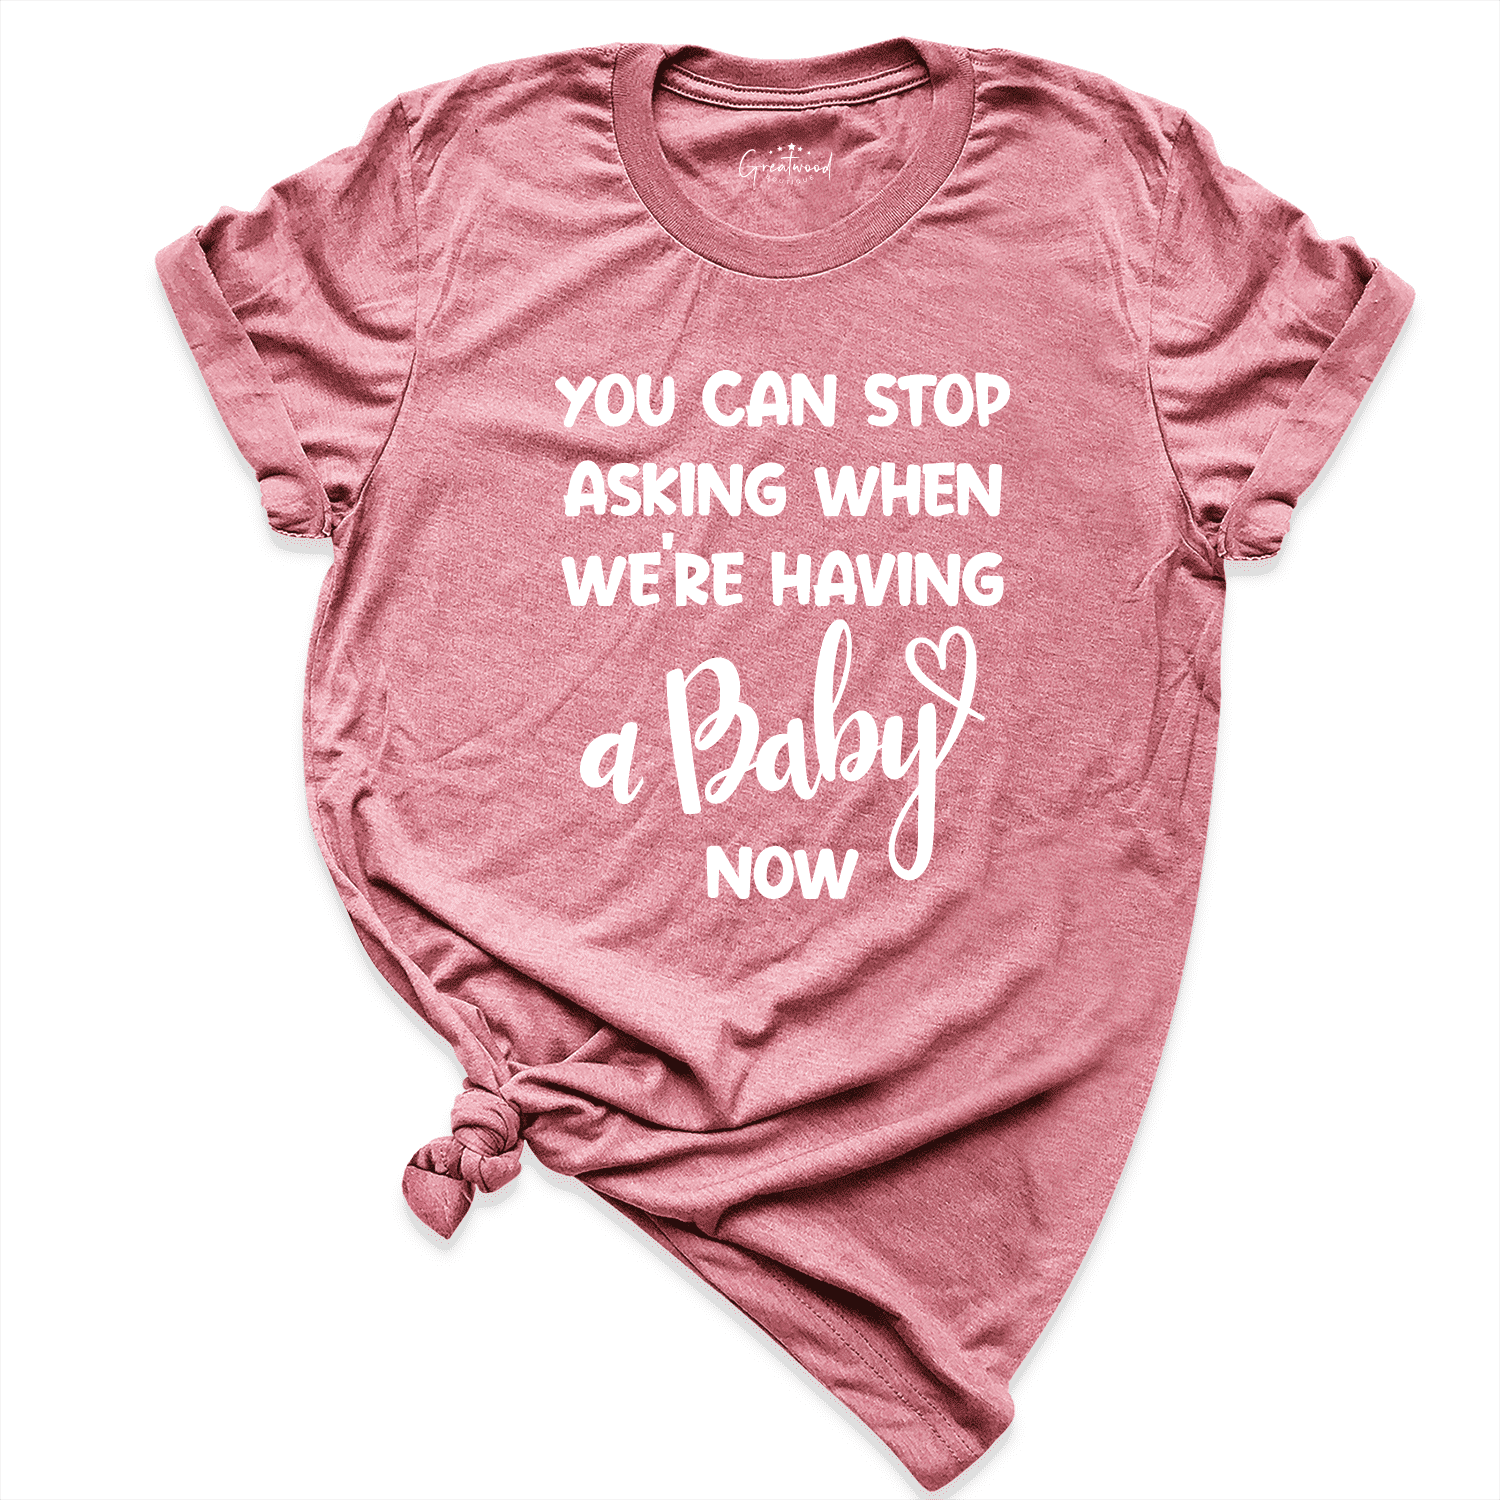 You Can Stop Asking When We're Having a Baby Now Shirt Mauve - Greatwood Boutique